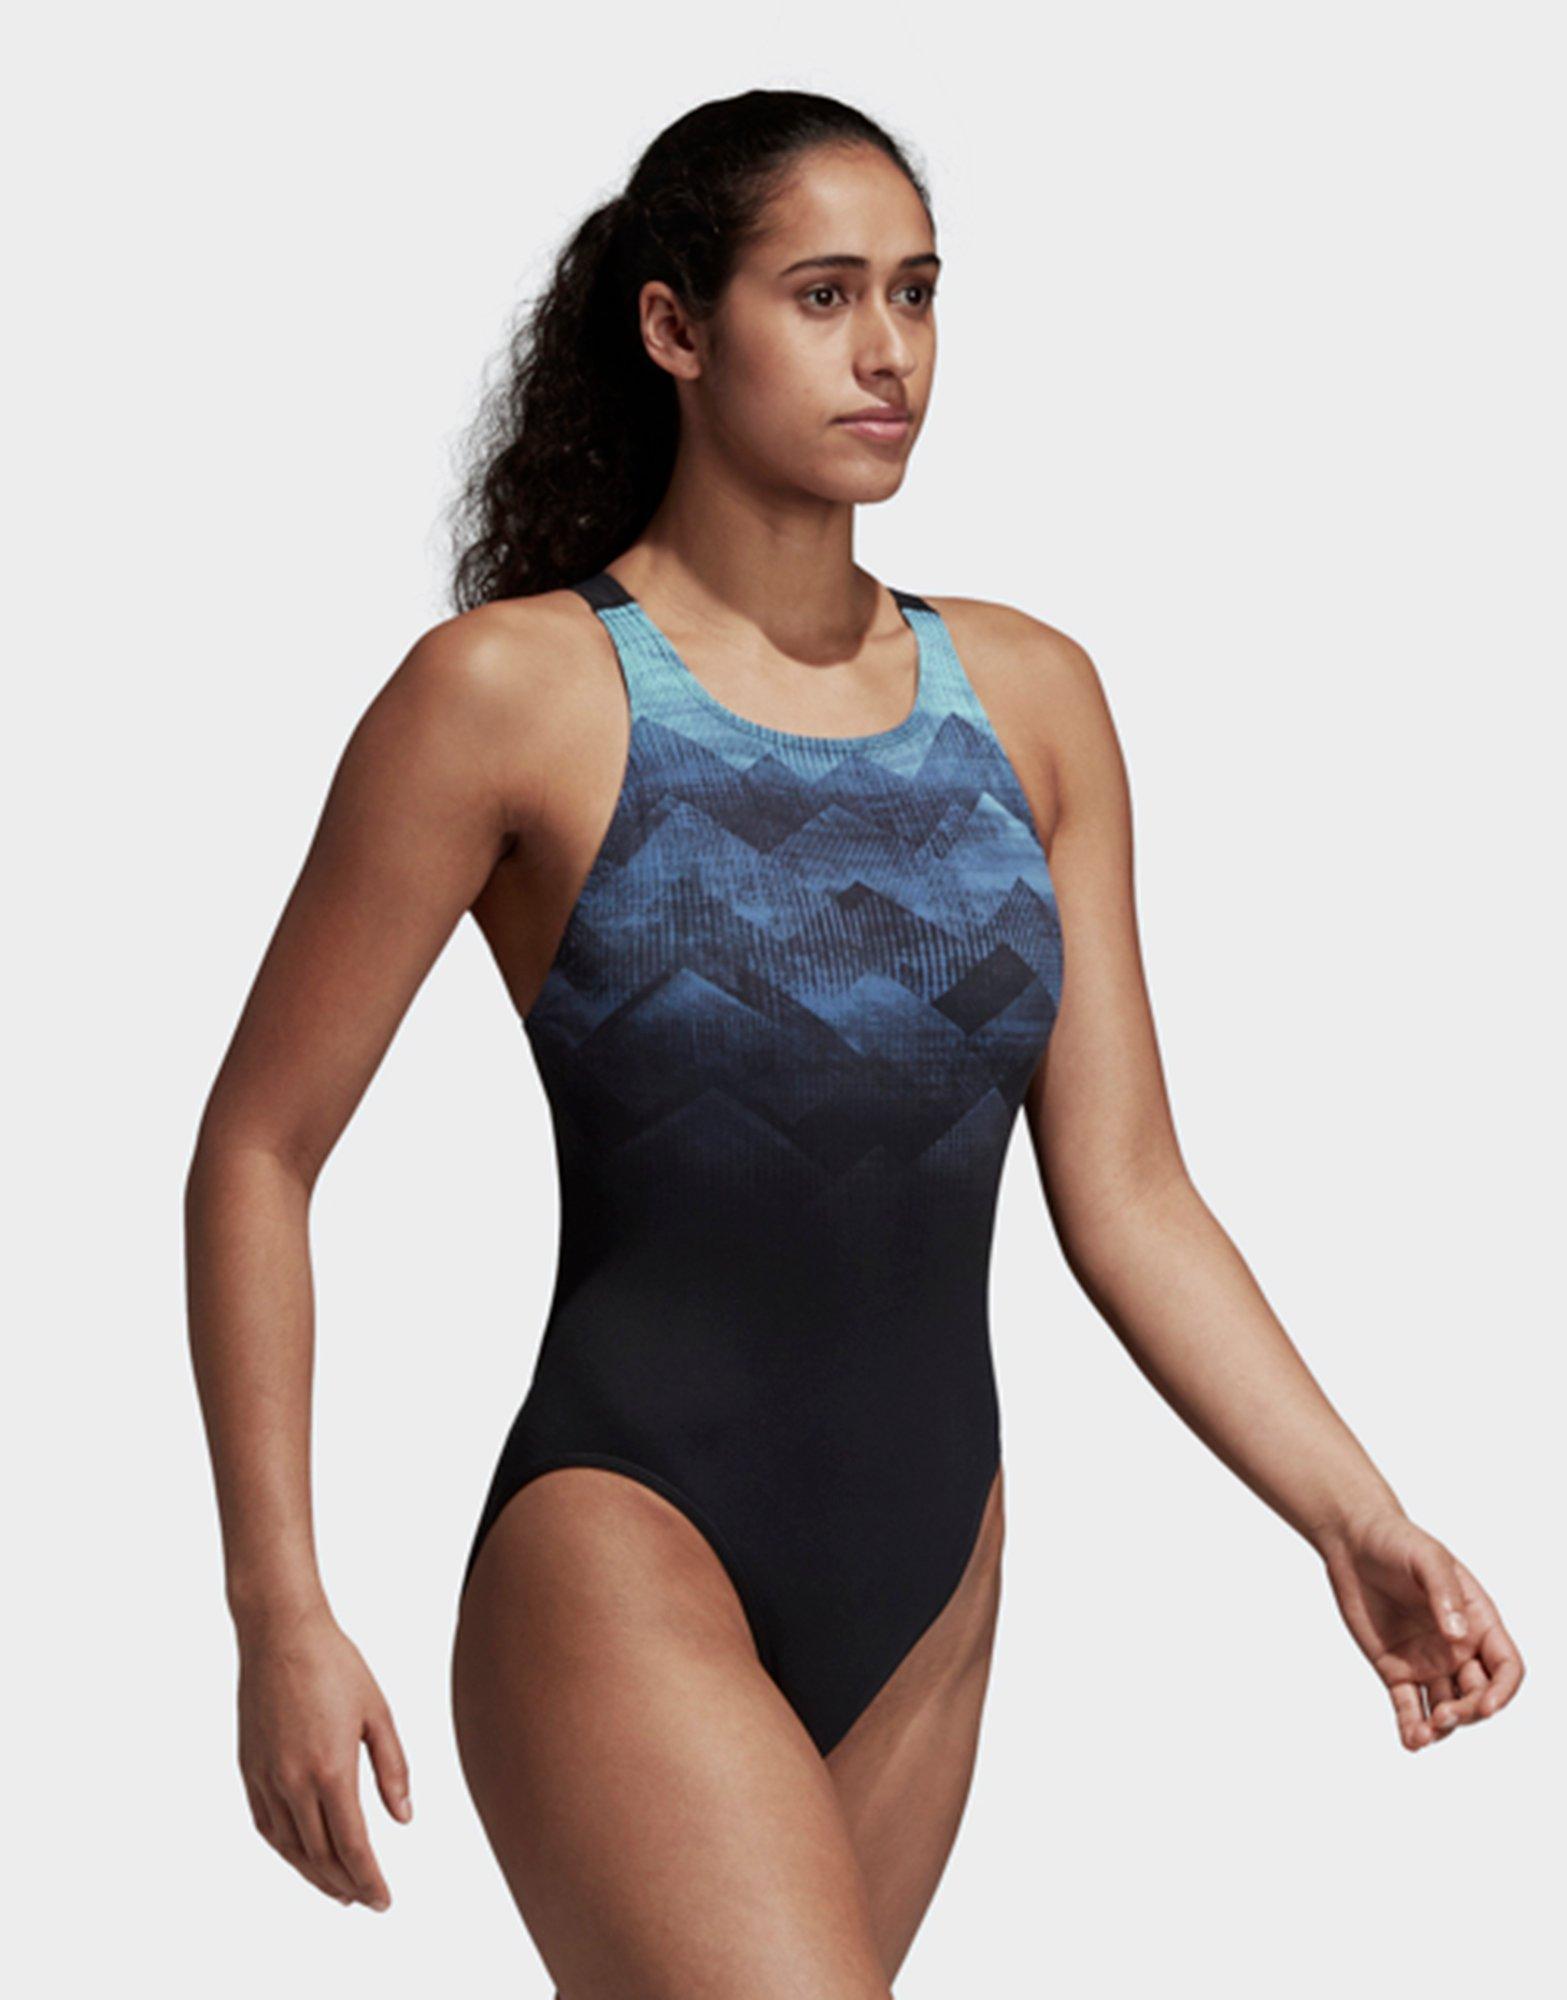 adidas Placed Print Swimsuit in Blue - Lyst